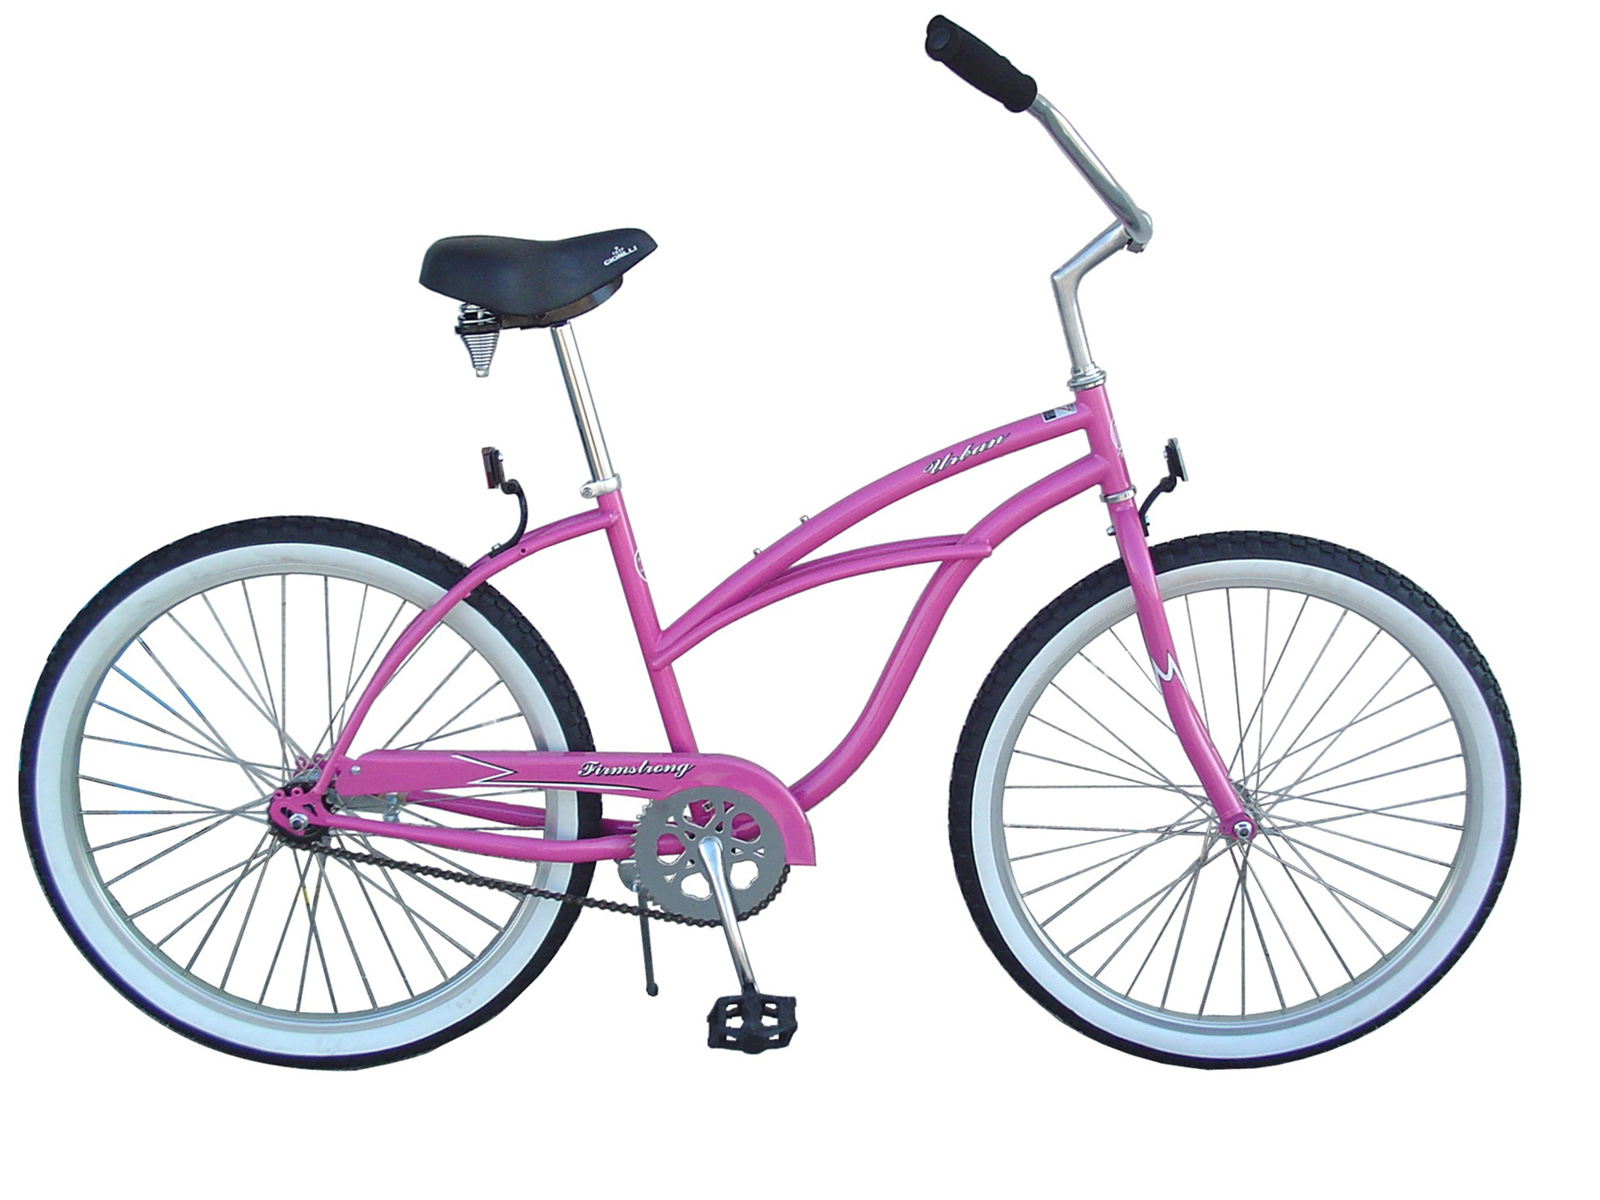 Cartoon images of a bike 3d hd picture design free download for 